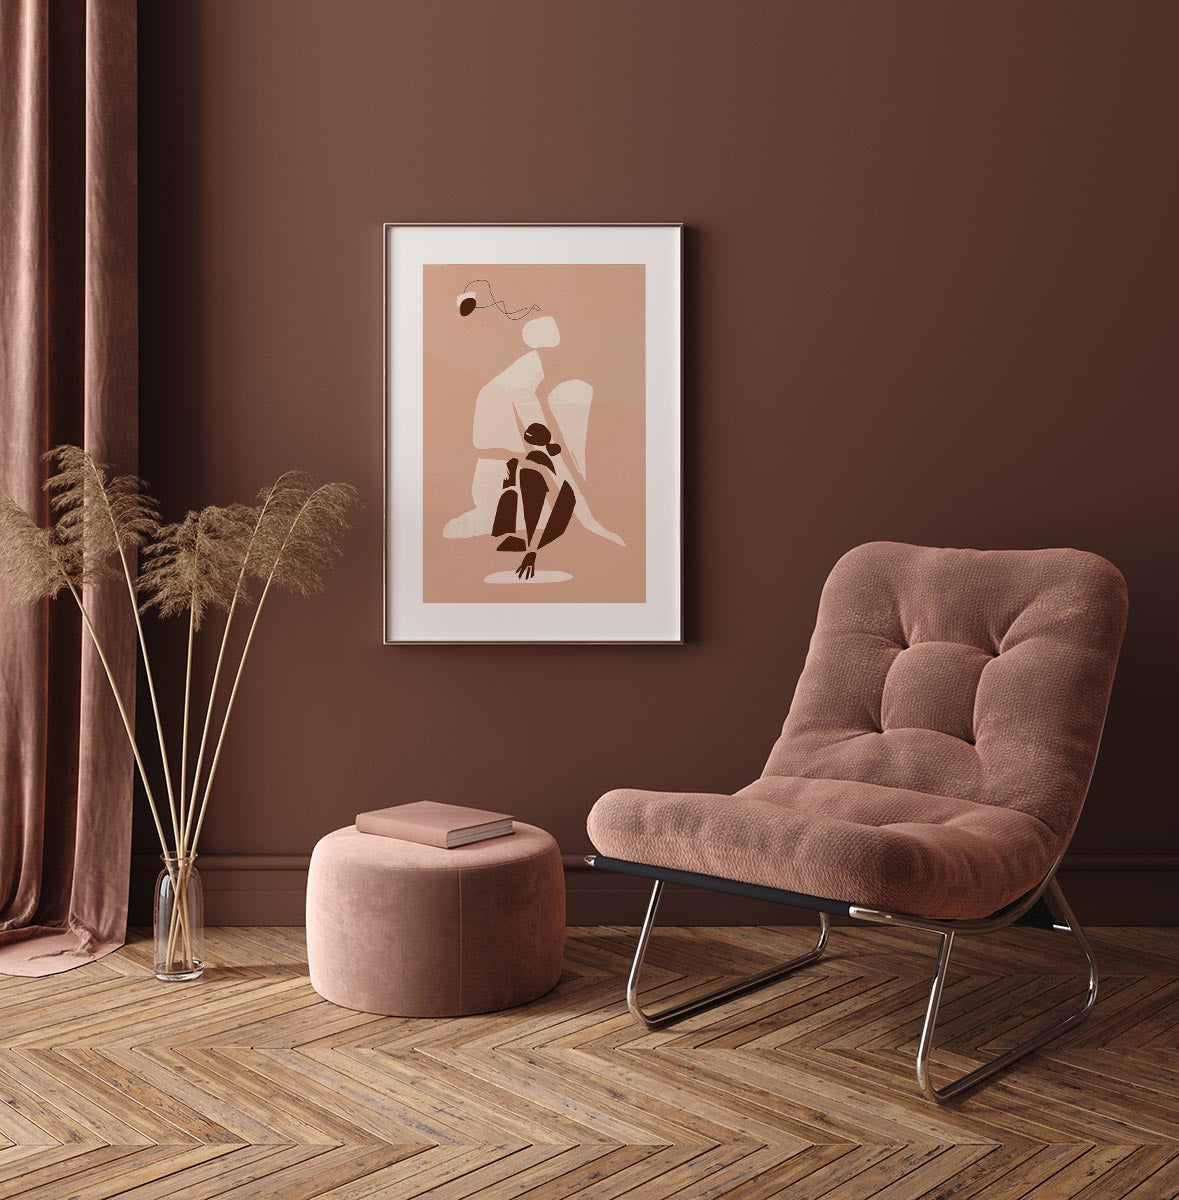 Minimalist abstract art poster featuring a stylized figure in contemplation, rendered in soft beige, brown, and cream hues, evoking a serene and thoughtful atmosphere.